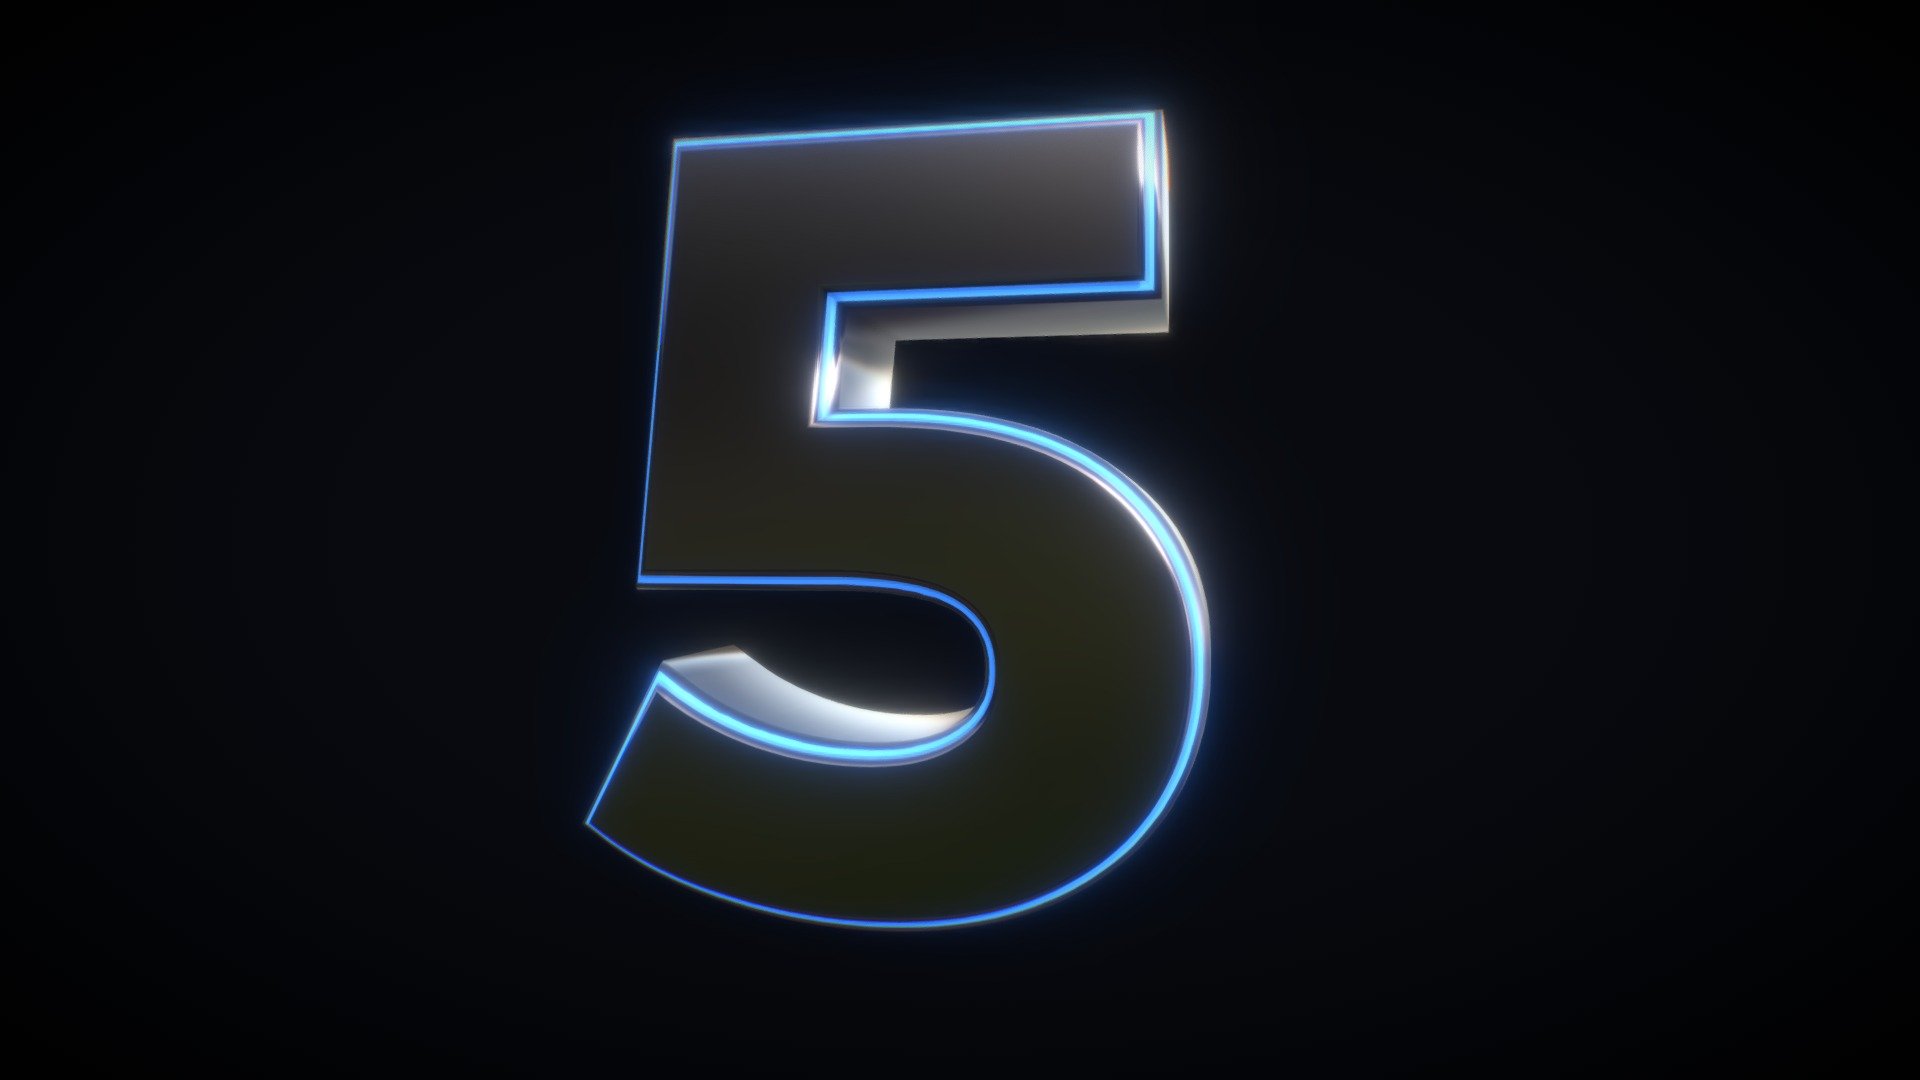 3D model of Number Five
I've created this model for free countdown video, you can watch it here: 
YouTube link

If you want to download this video, go here: 
Pixabay link

Here's record of my stream where I'm making it:
YouTube link - 3D Number - 5 (FIVE) - Download Free 3D model by Jihambru 3d model